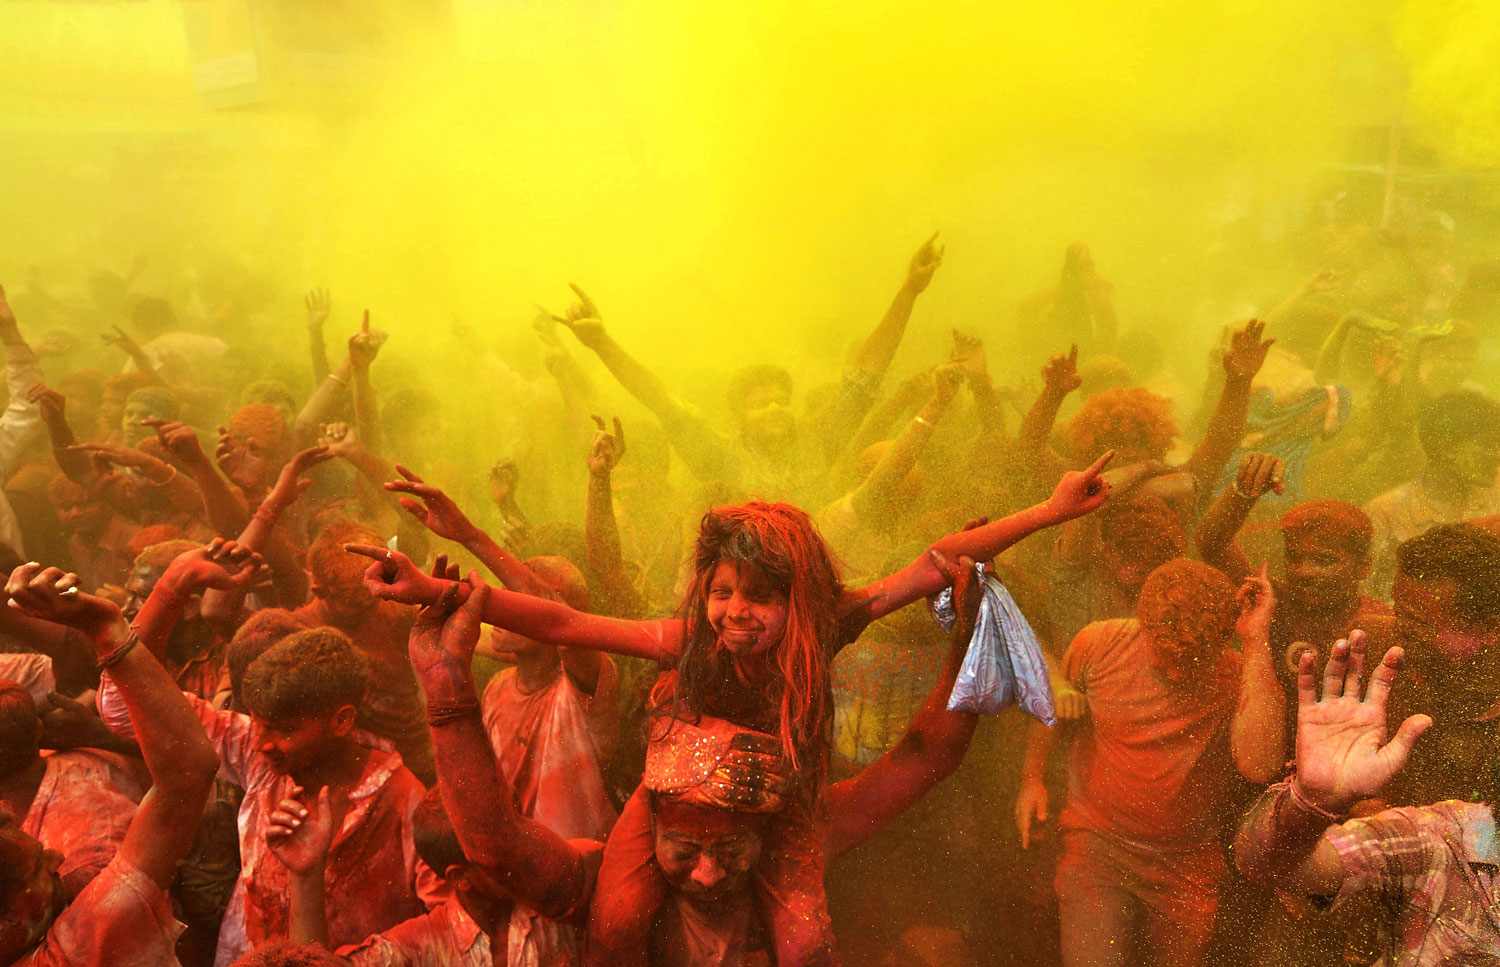 Indian revellers cover each other with coloured powder and dance while taking part in Holi festival celebrations in Guwahati on March 17, 2014.